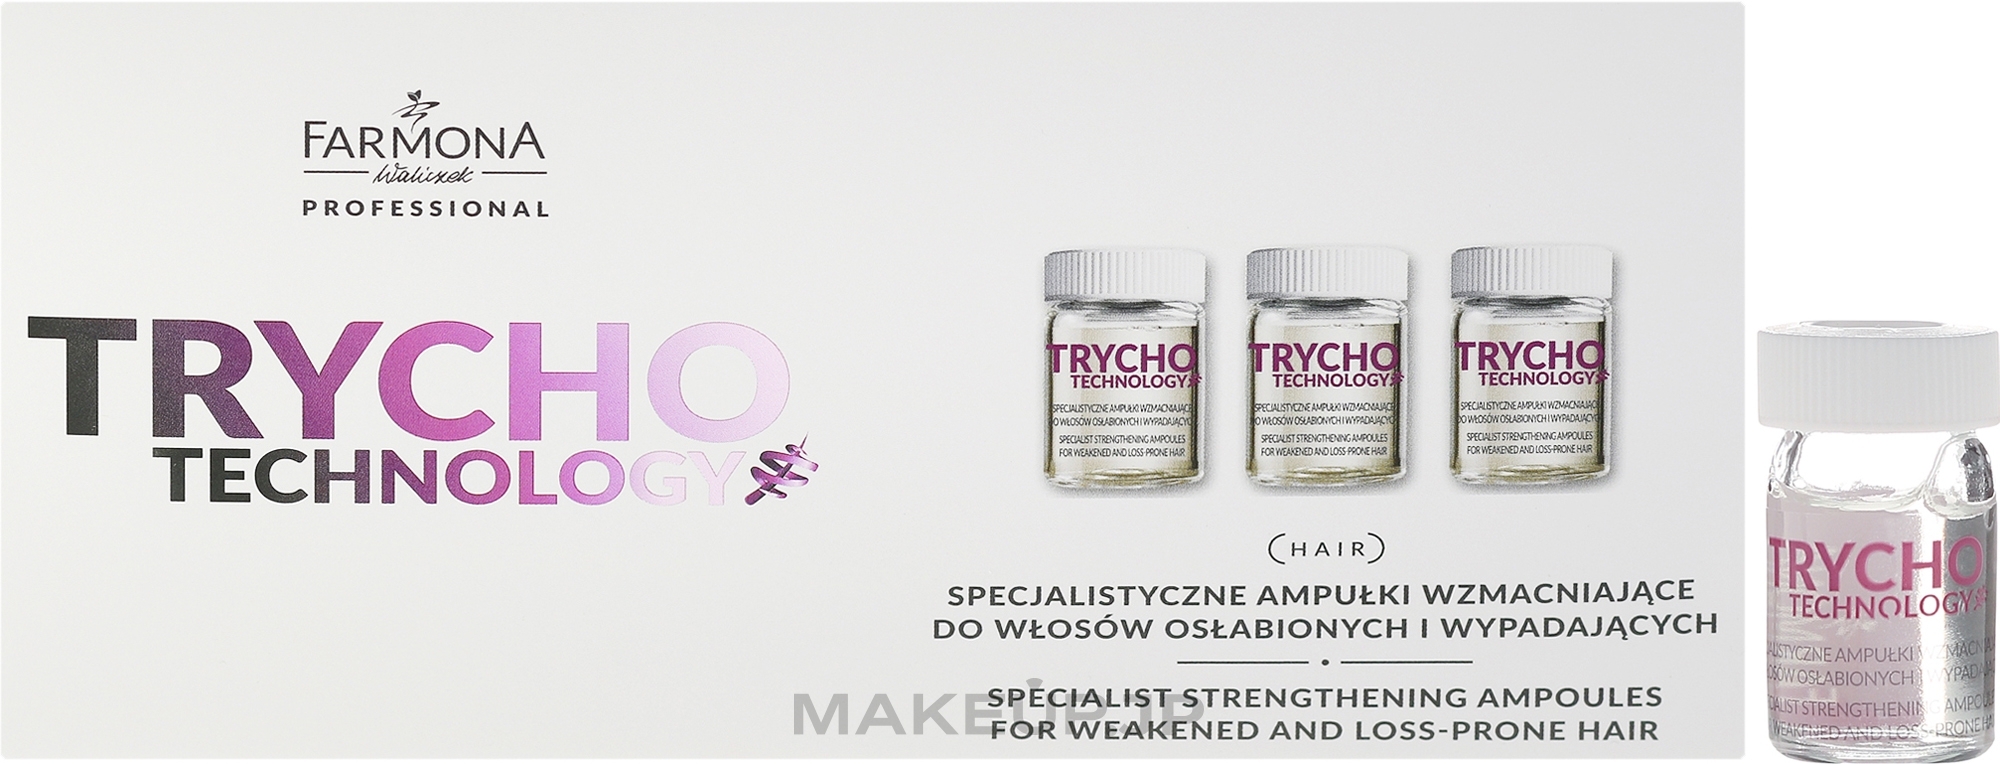 Specialized Strengthening Anti Hair Loss Ampules for Weak Hair - Farmona Professional Trycho Technology Specialist Strengthening Ampoules For Weakened And Loss-Prone Hair — photo 10 x 5 ml